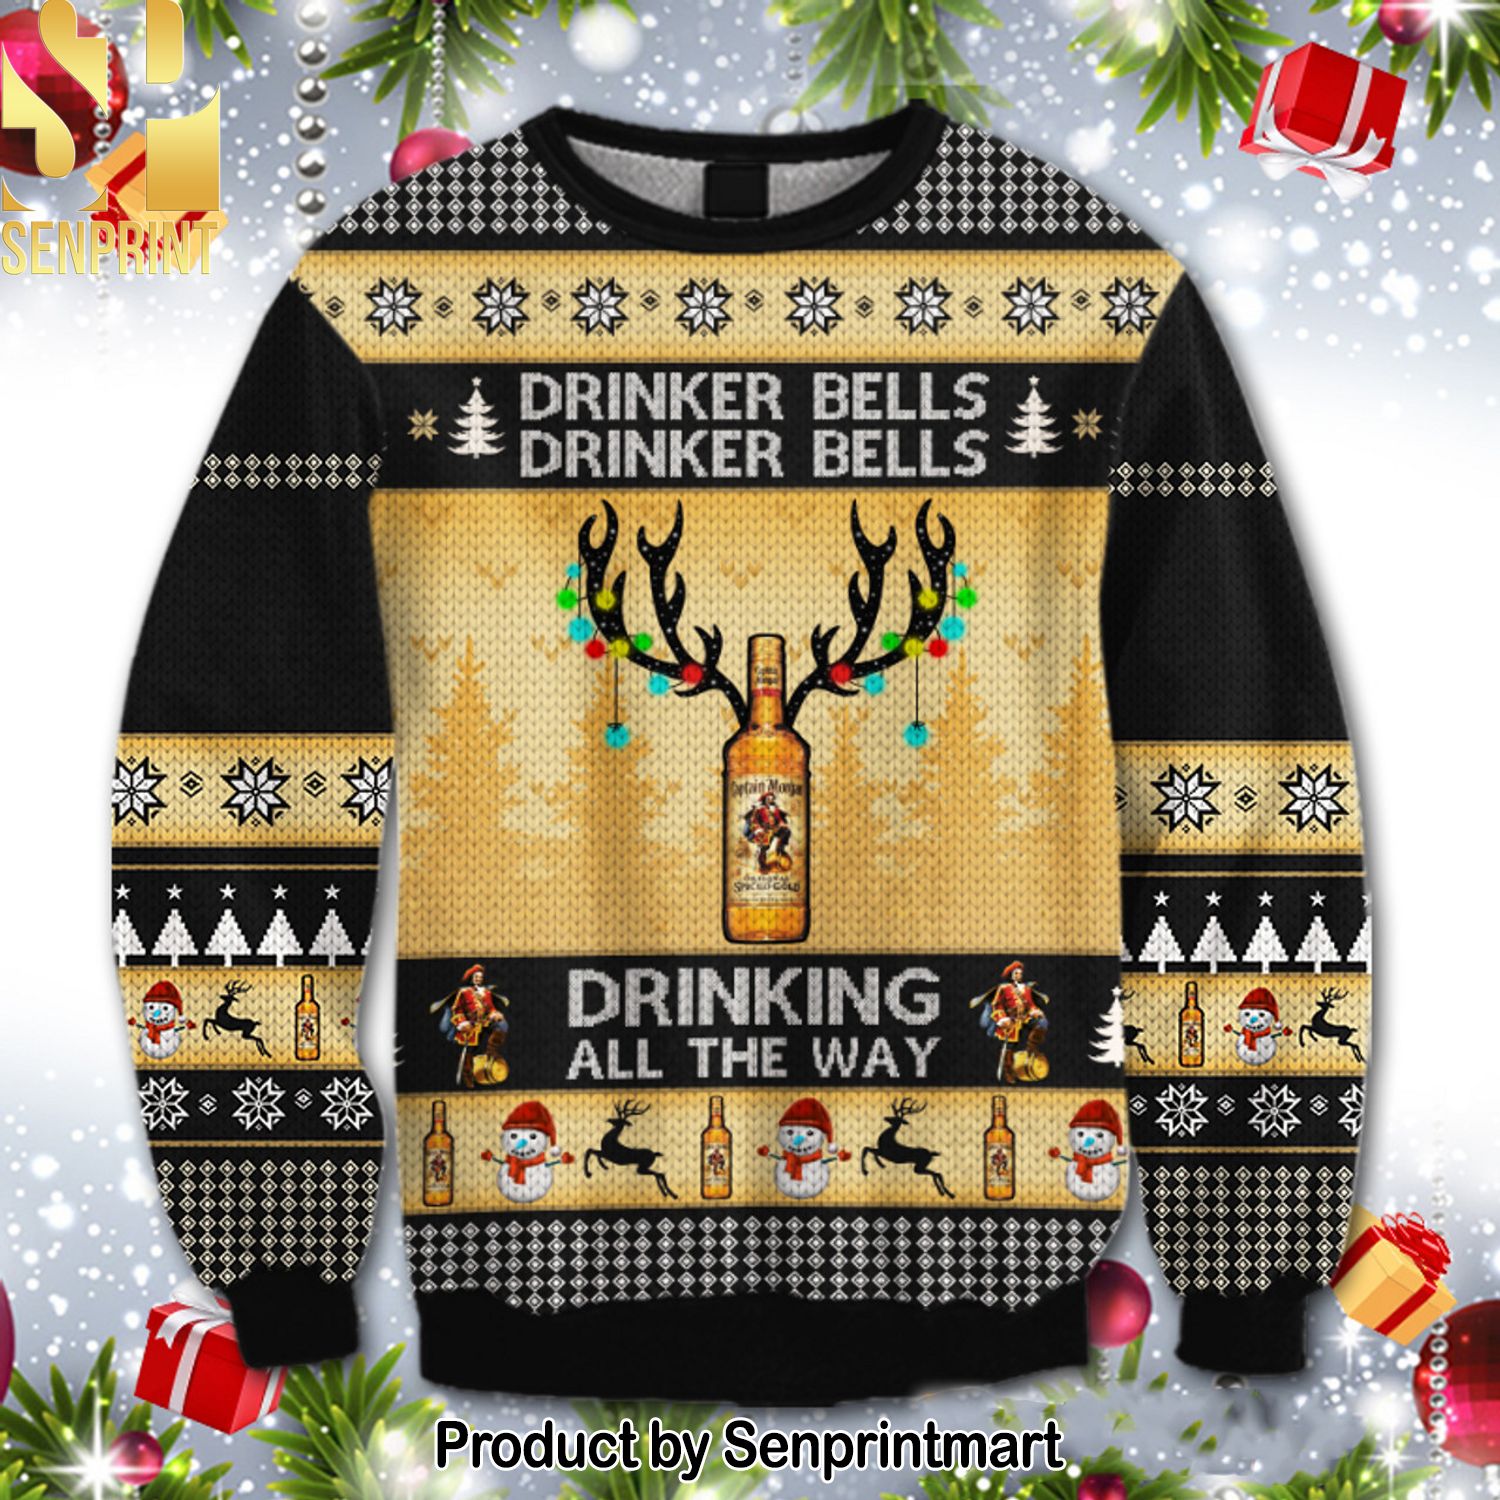 Captain Morgan Drinker Bells Knitting Pattern Ugly Christmas Holiday Sweater